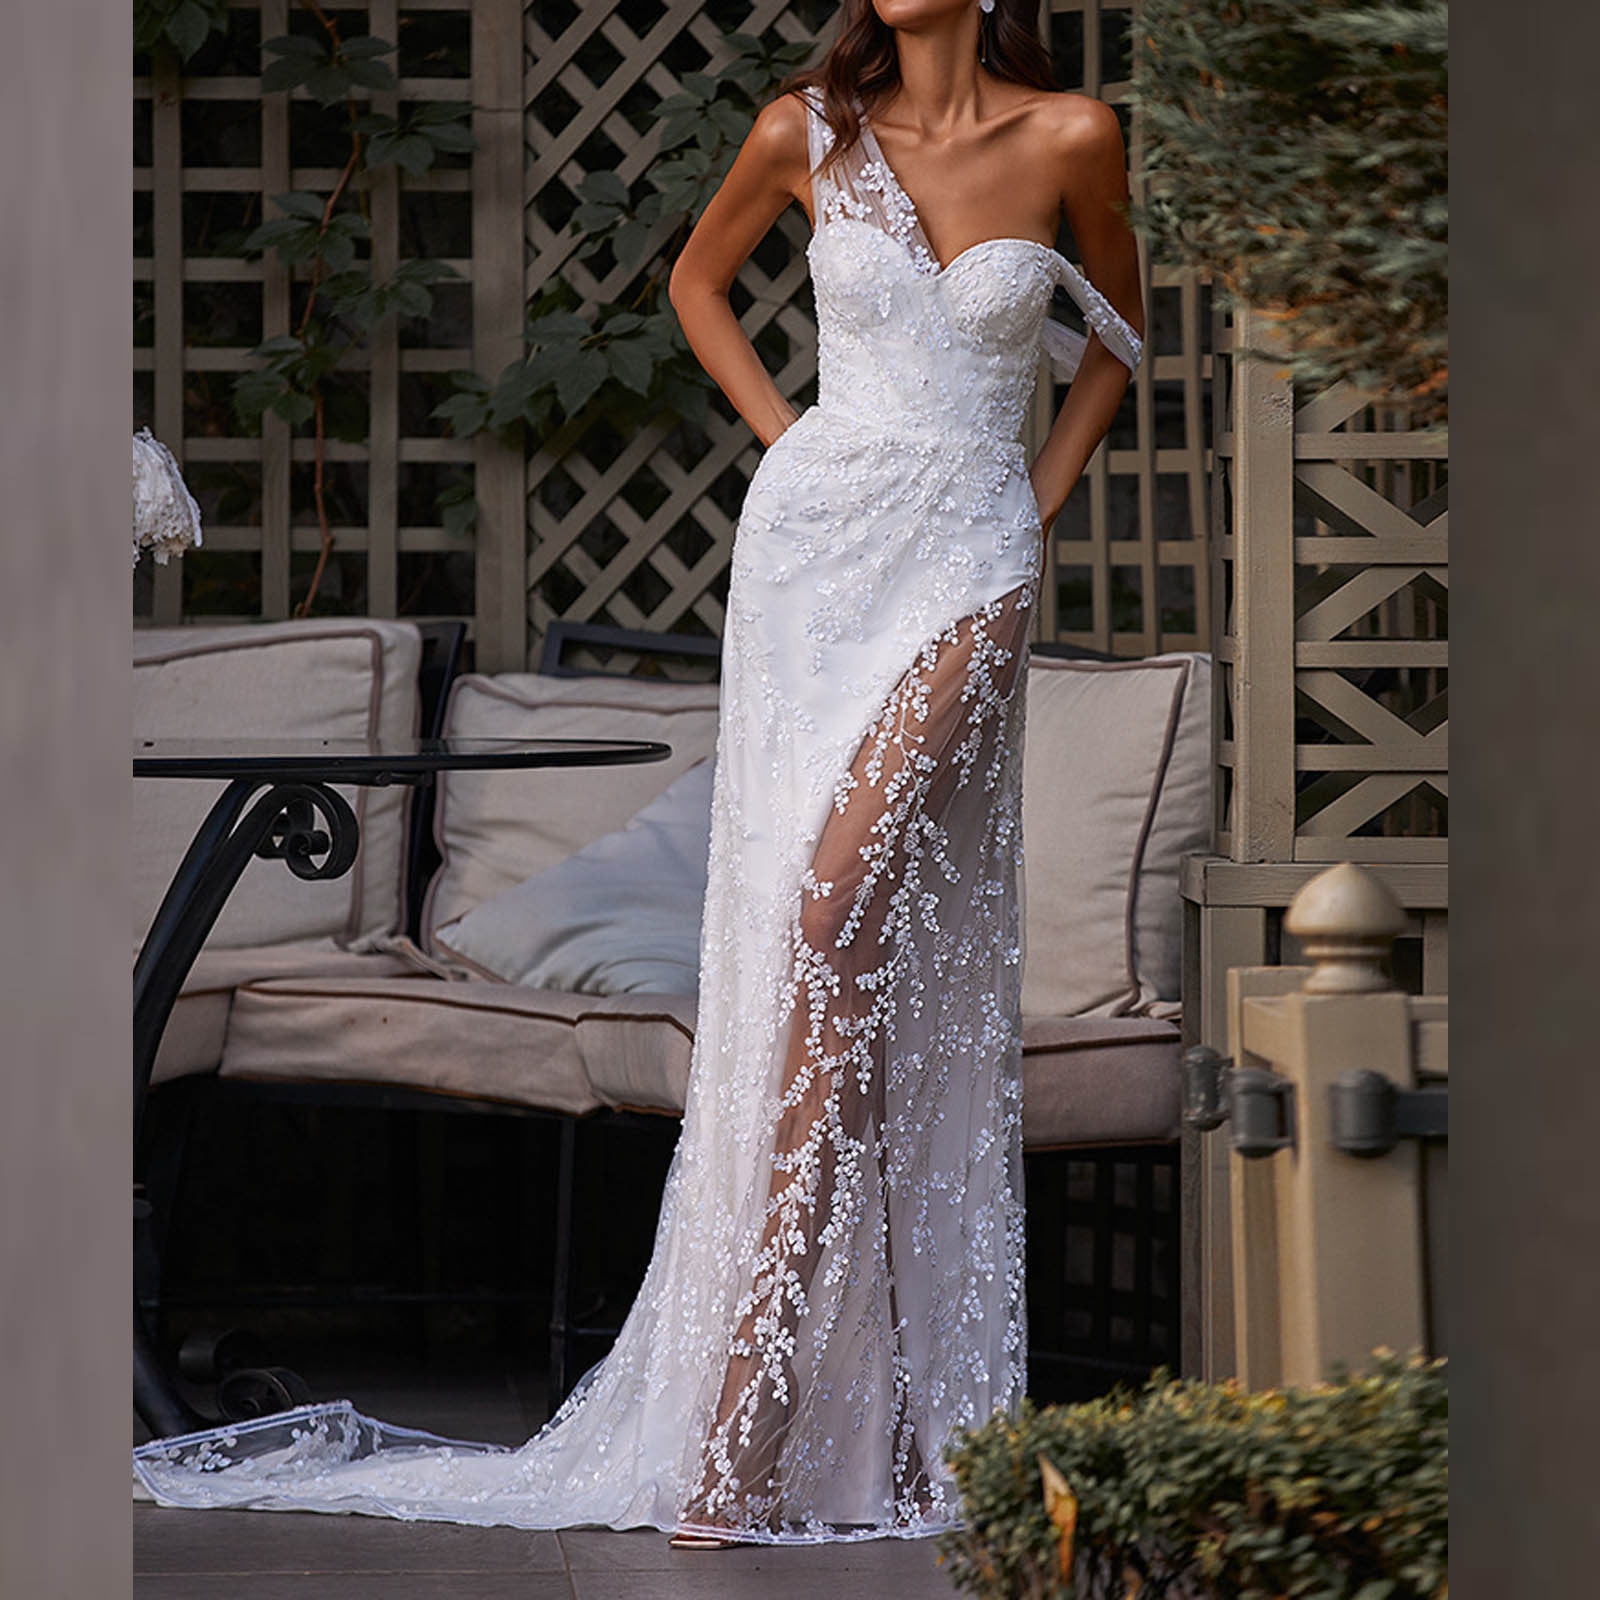 Venus valink Beach Wedding Dress White Bridal Gowns Lace Appliques Train  Casual Backless V Neck Bridal Dress Bridal Accessories Mariage Wedding  Party Supplies : Amazon.co.uk: Fashion